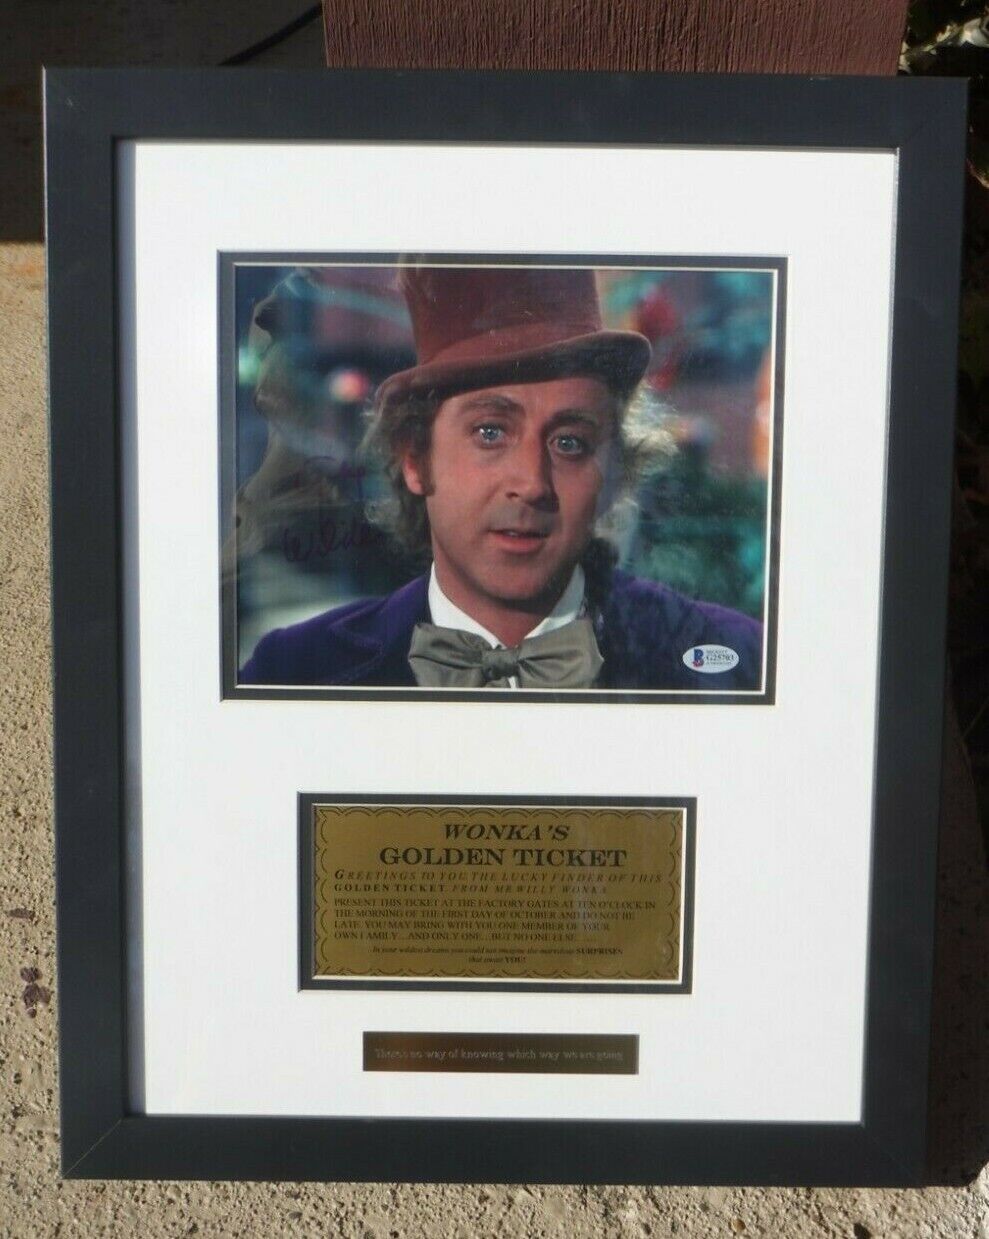 Gene Wilder Autographed Signed Willy Wonka Golden Ticket New Frame Beckett Authenticated 